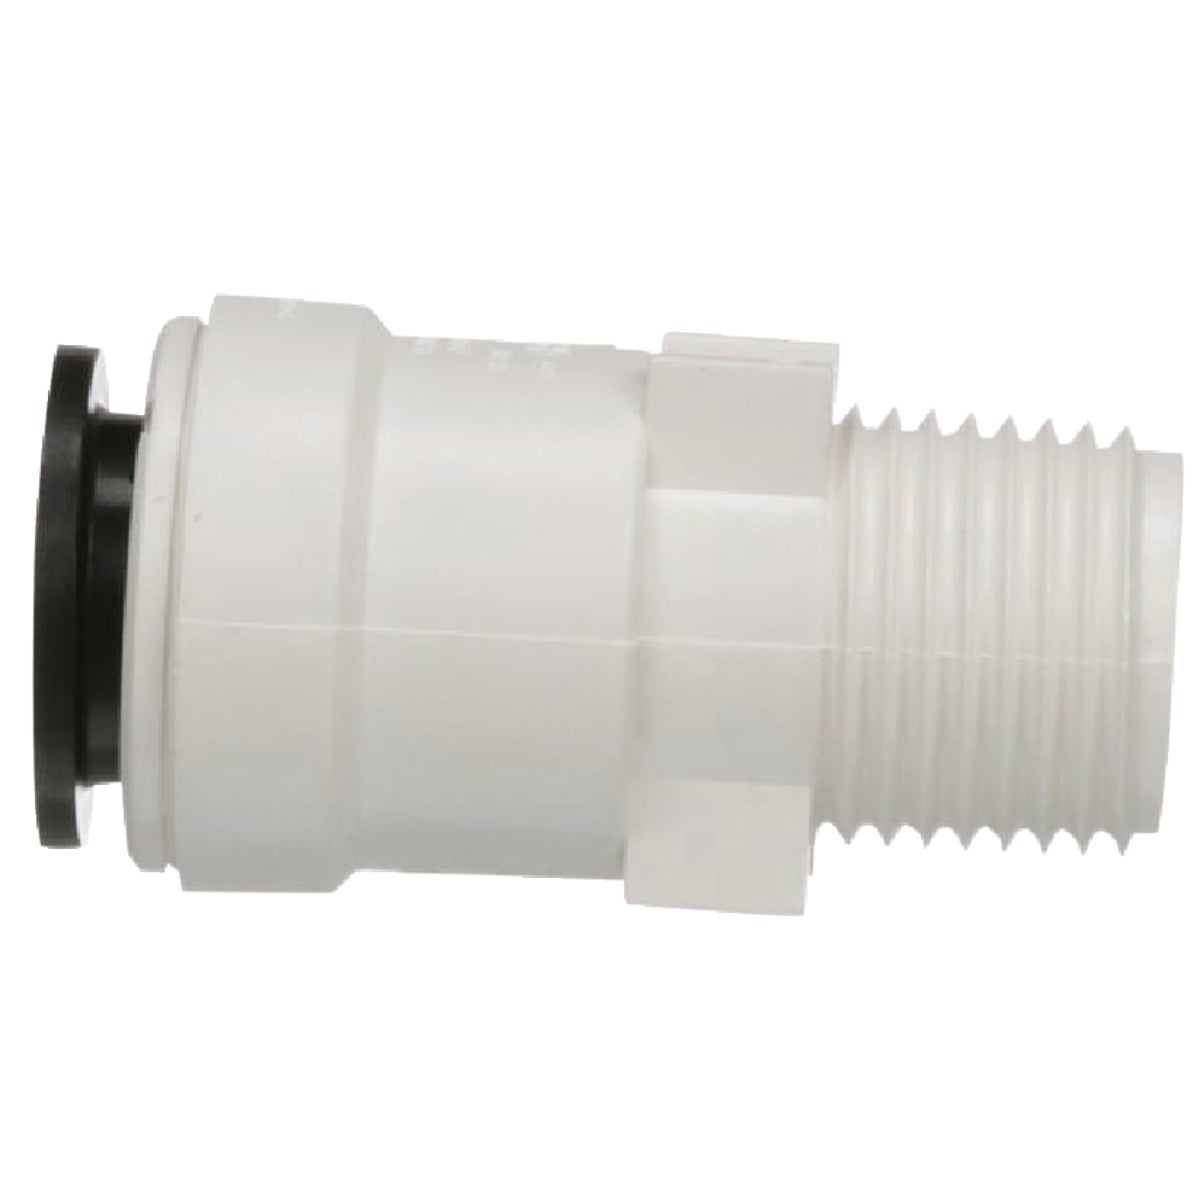 Watts Aqualock 3/4 In. CTS x 1/2 In. MPT Push-to-Connect Plastic Adapter